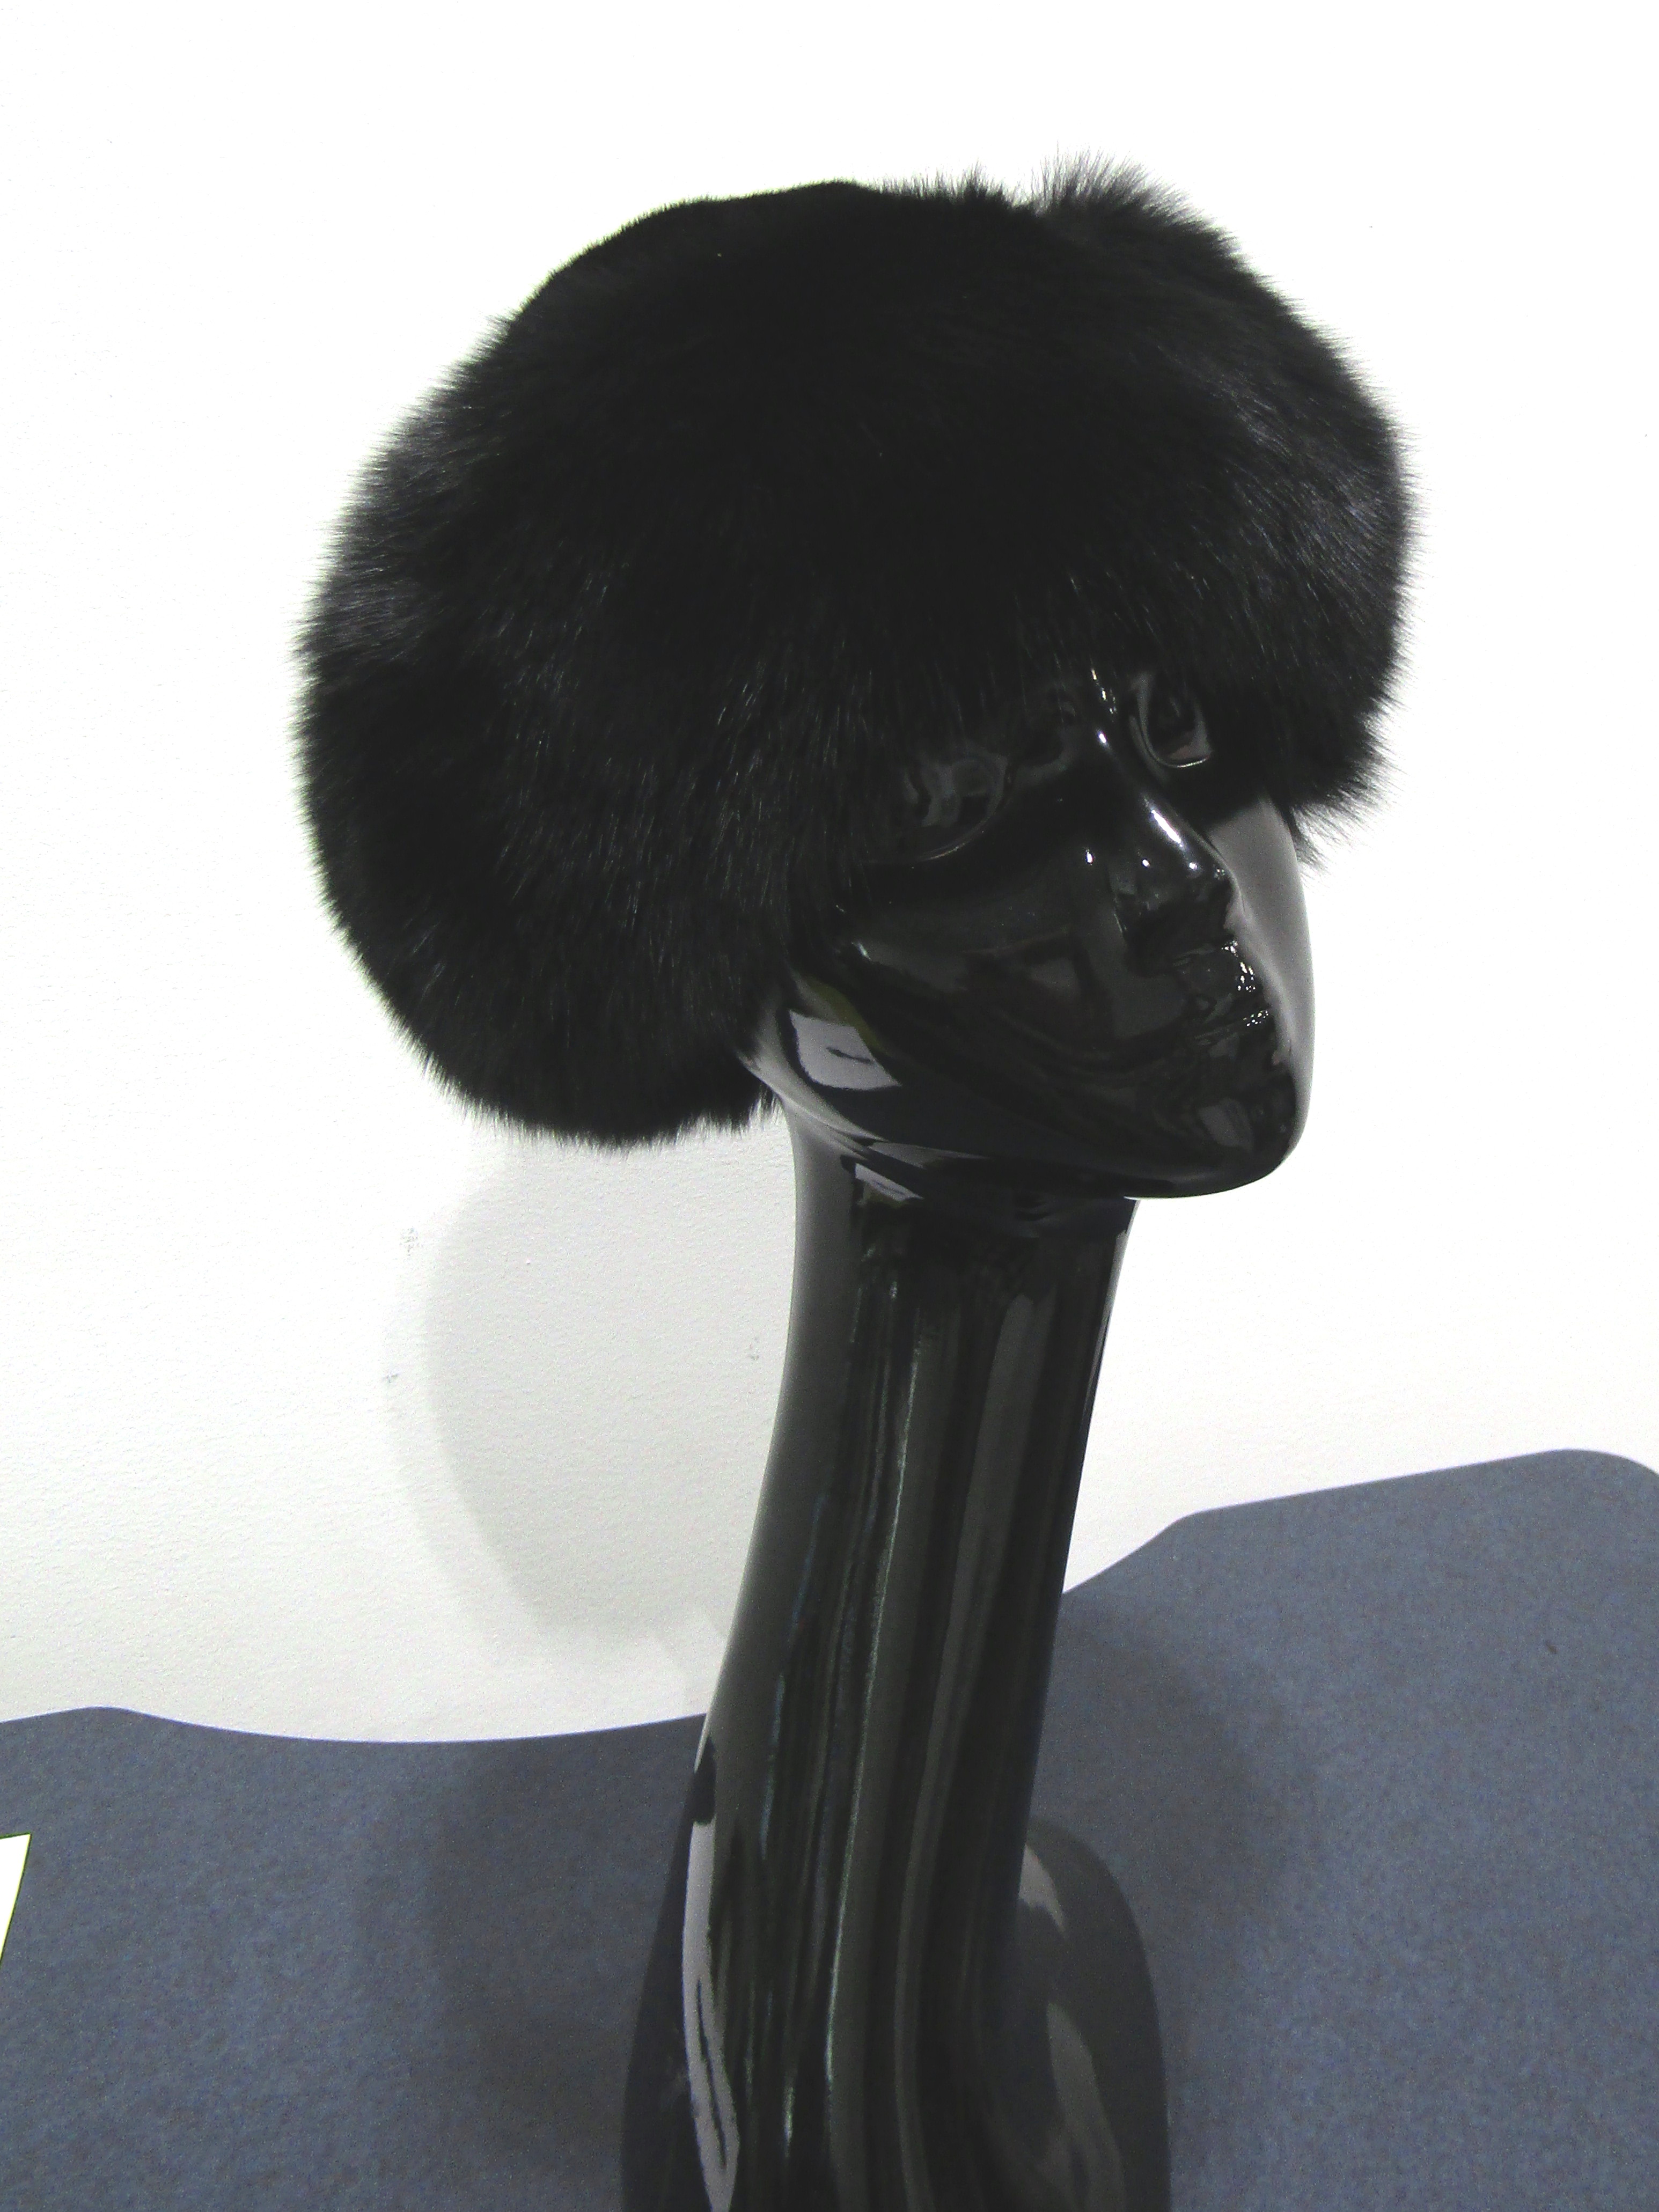 New Black Dyed Mink and Black Dyed Fox Cuff Hat